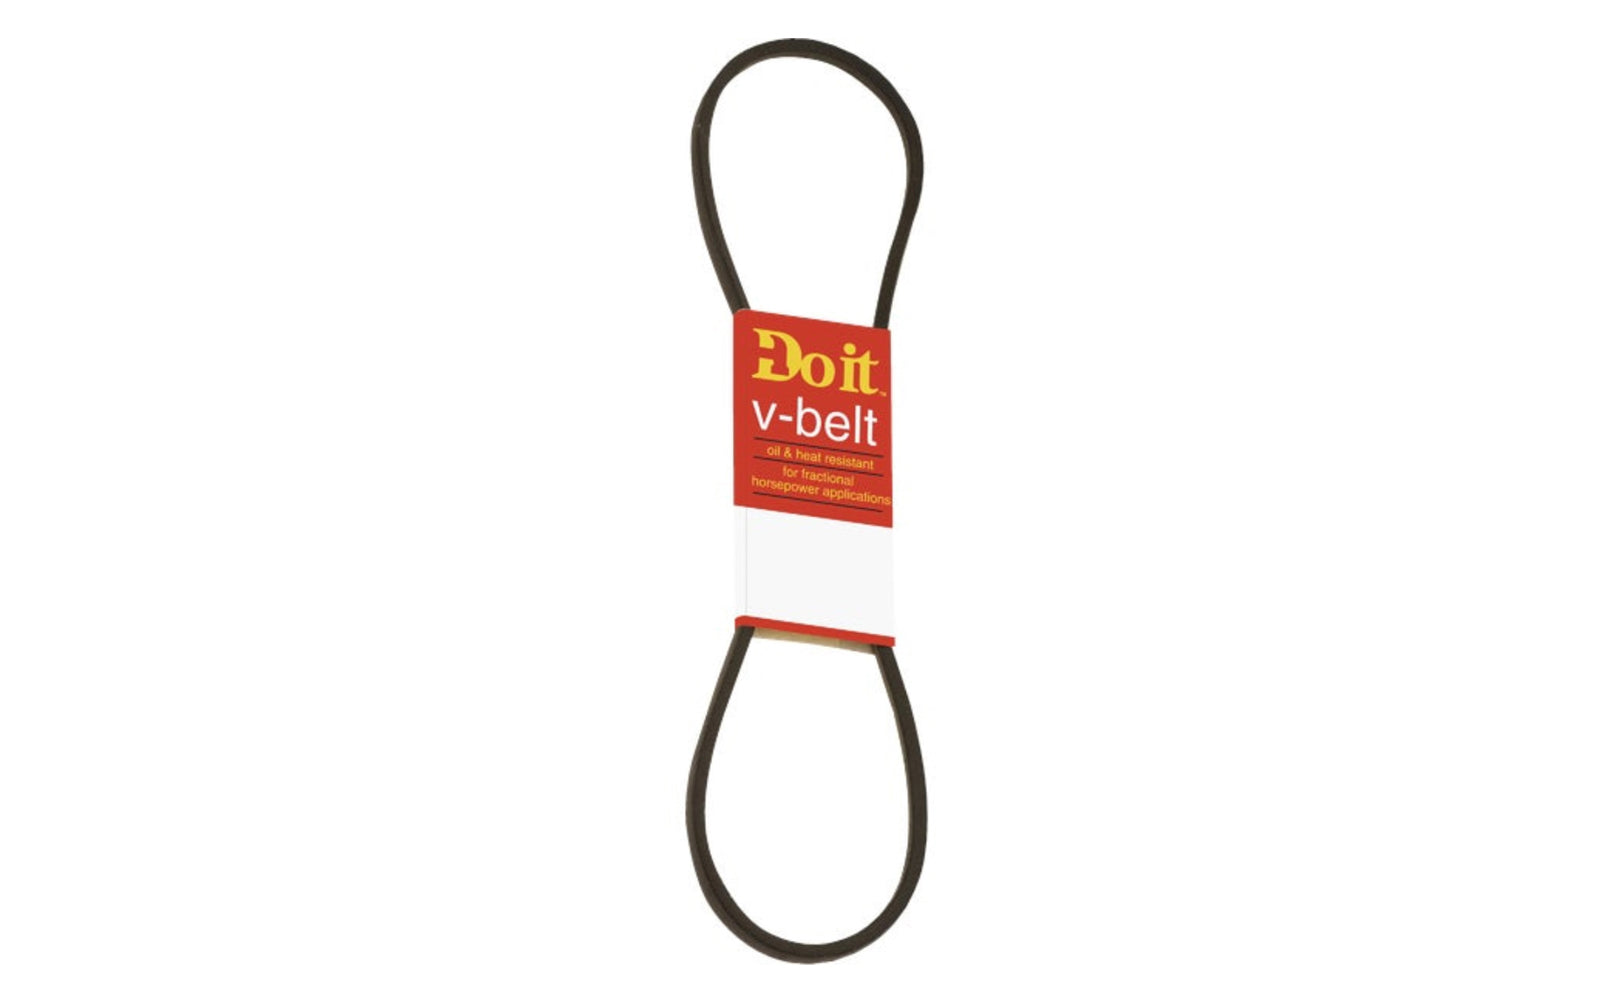 36" Long x 1/2" Width V-Belt - 4L360. Rubber V-Belt. Oil & heat resistant. Recommended for 1-3 HP (horsepower) light-duty applications. Typically the best option for electric powered applications. For refrigerators, washing machines, pumps, stokers, woodworking machines. Pulley type: A-Pulley.